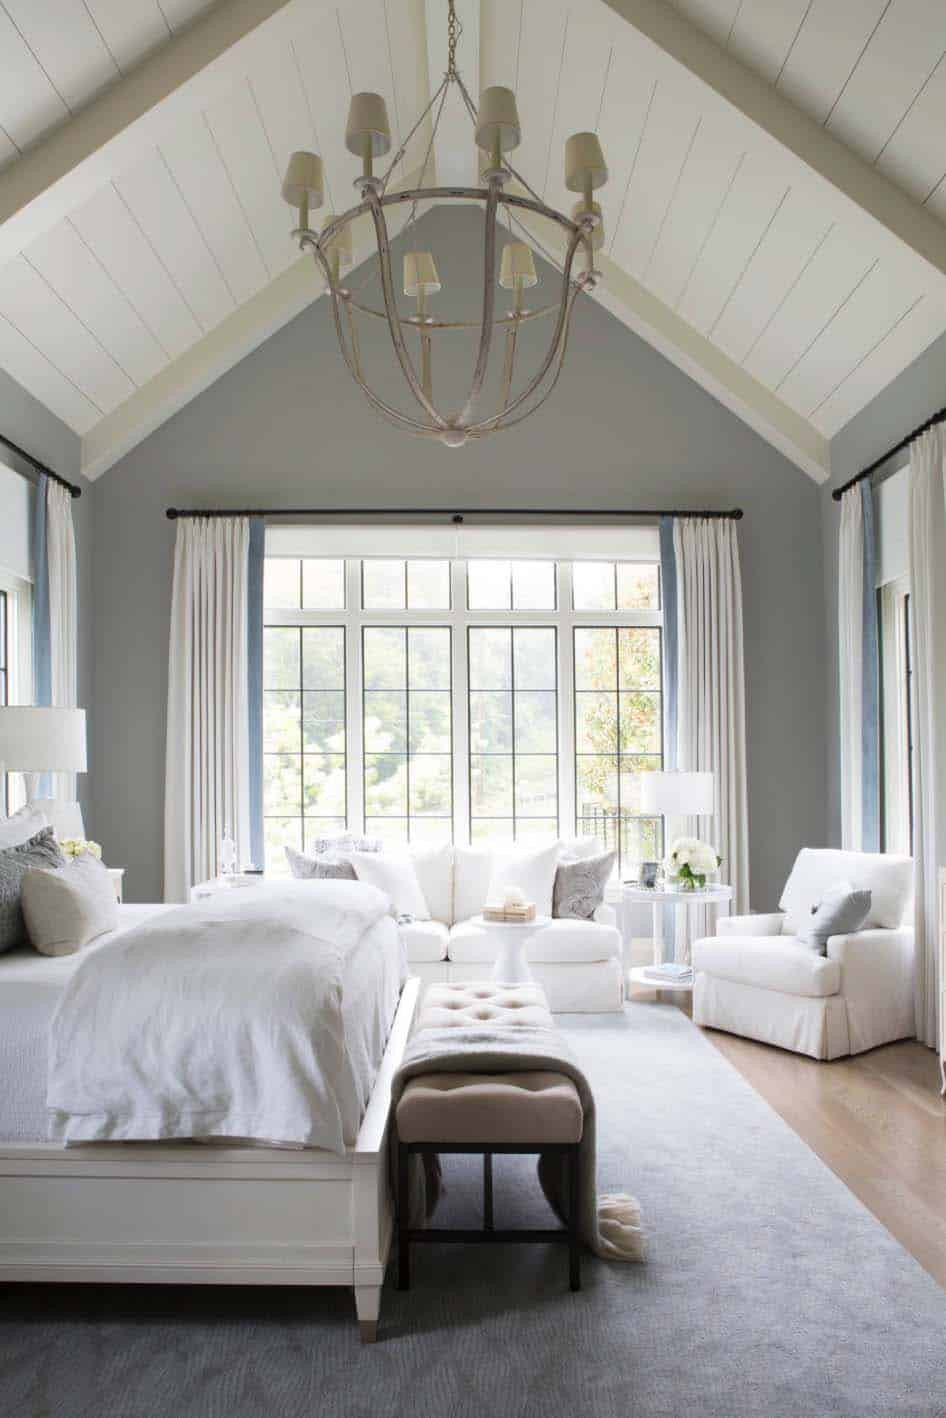 Master Bedroom Decorating Ideas
 20 Serene And Elegant Master Bedroom Decorating Ideas